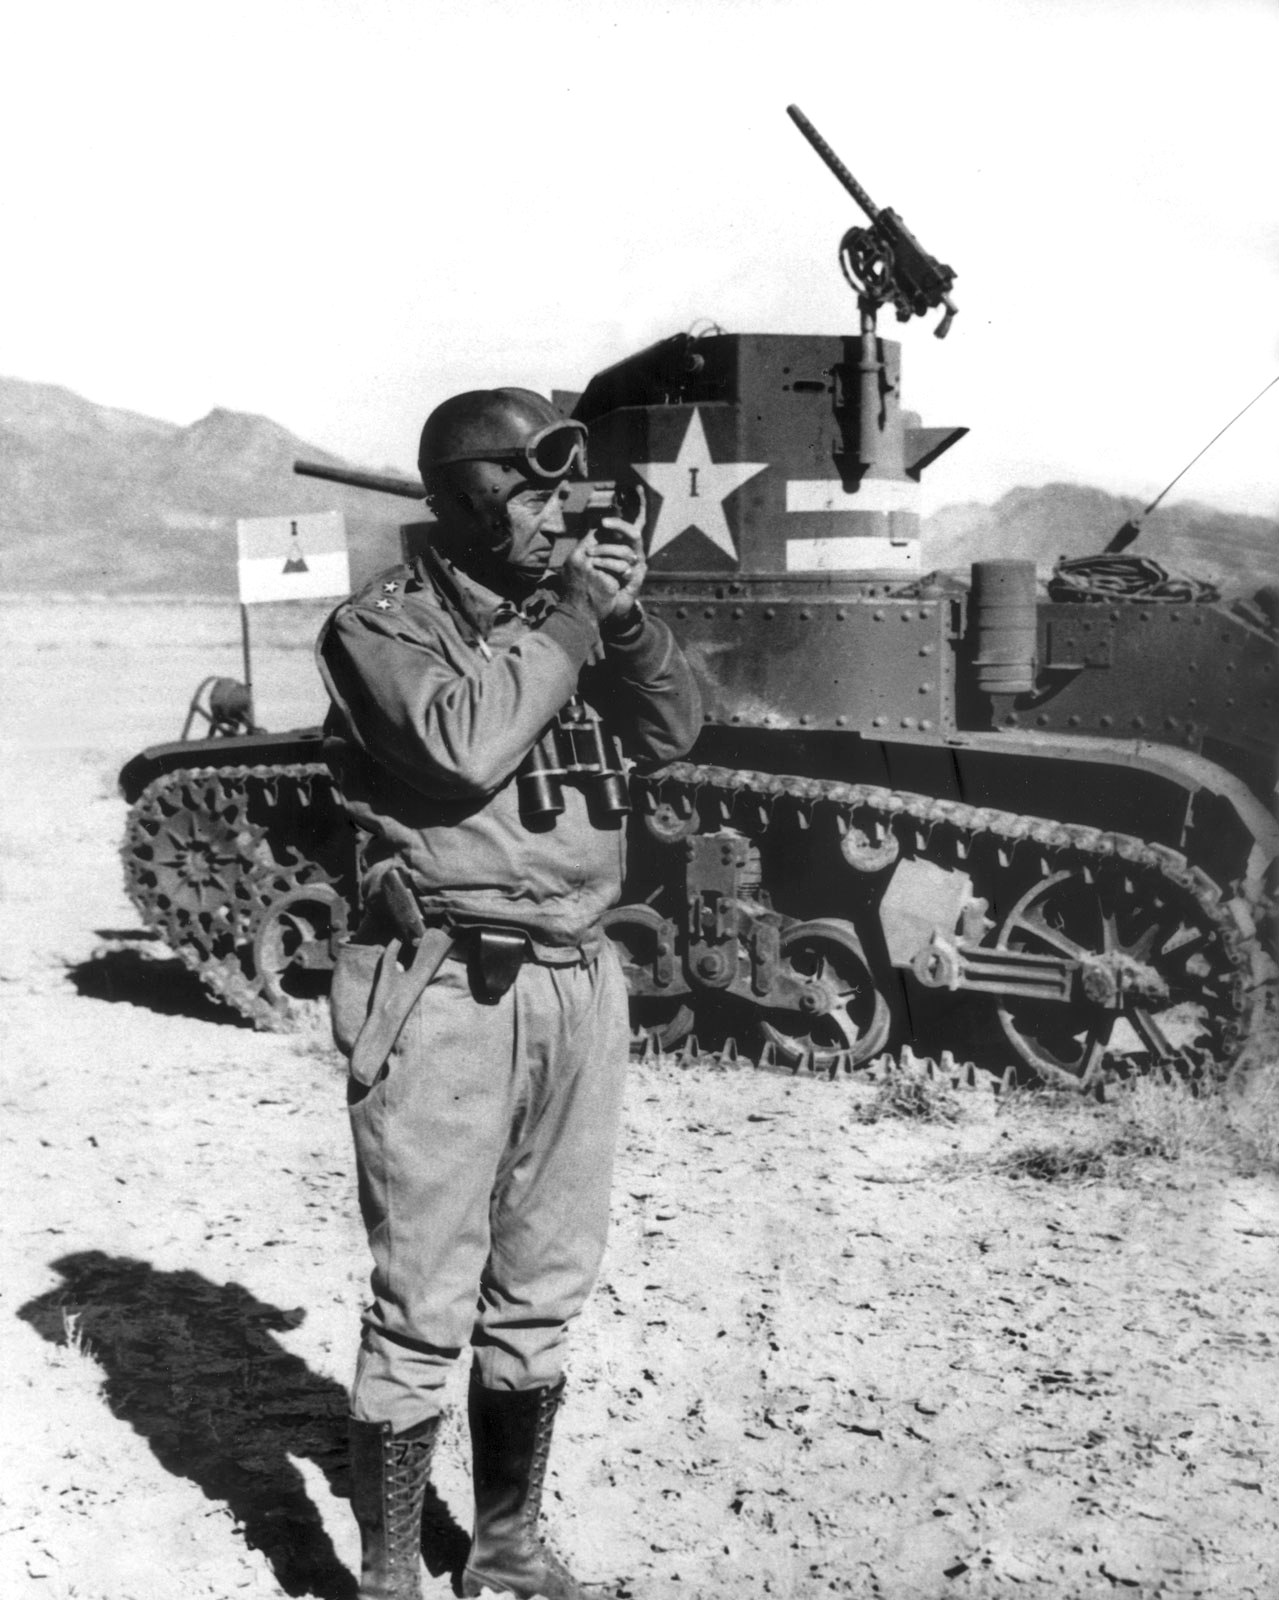 George Patton next to a M3 light tank, possibly in California, United States, 1942